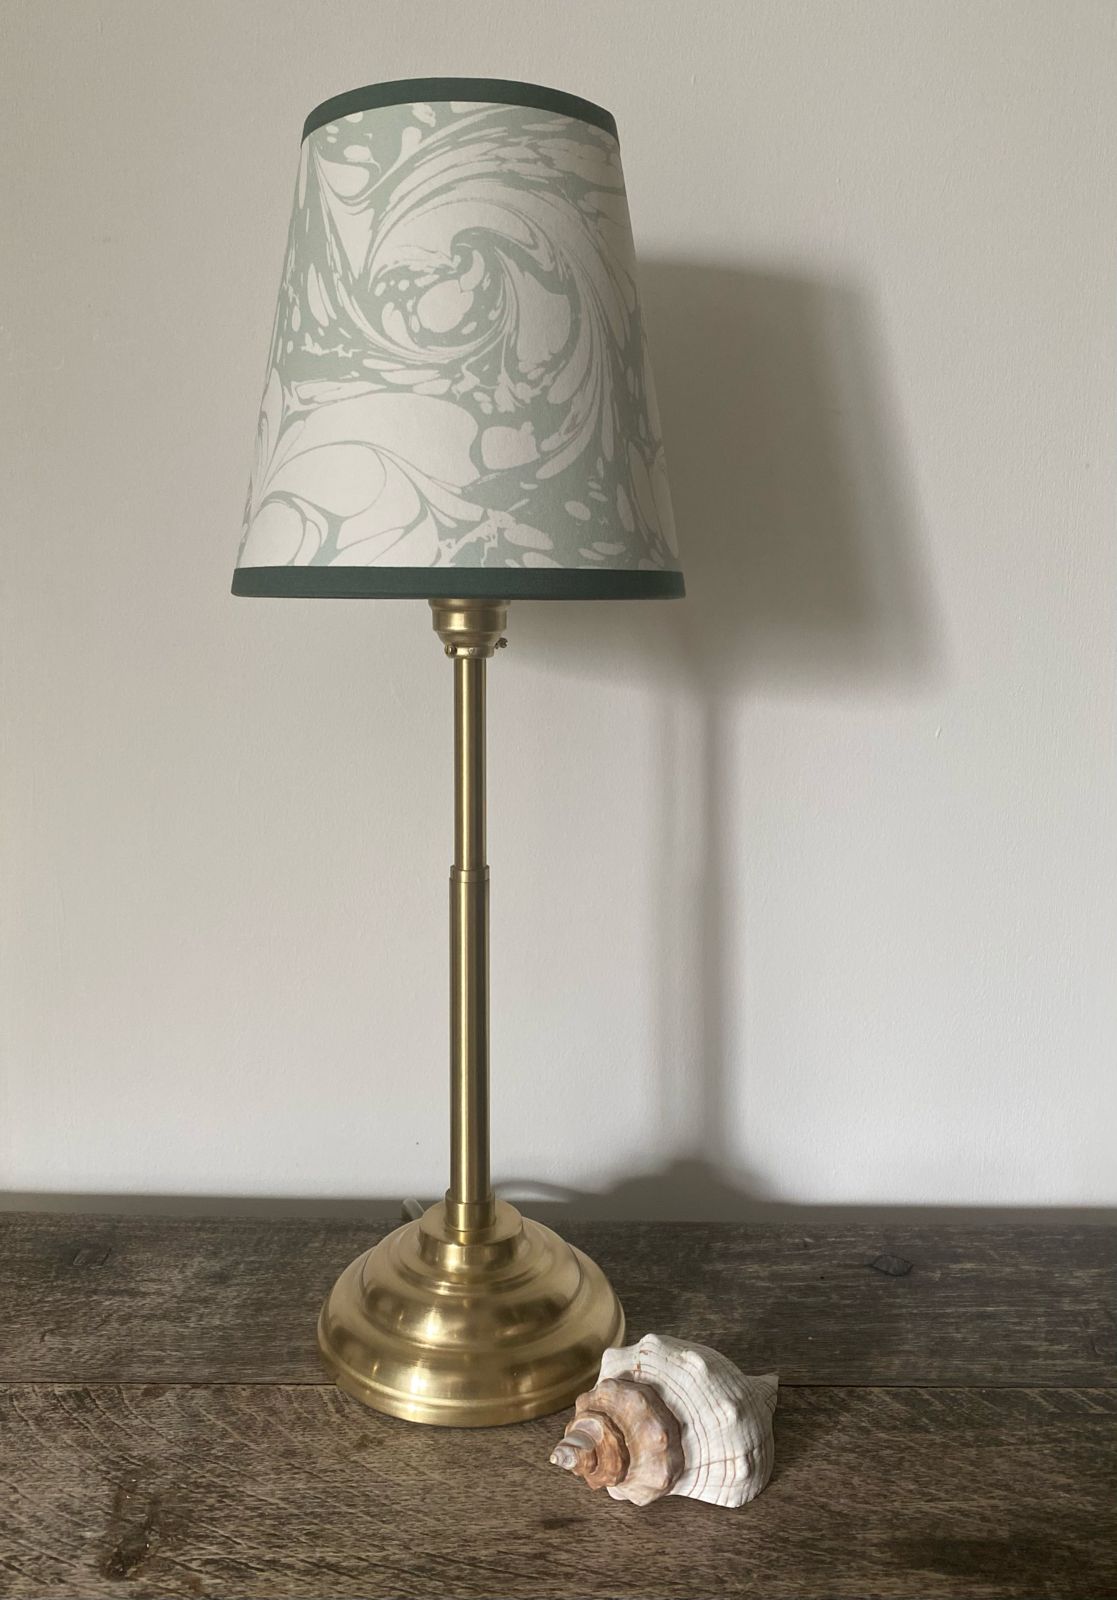 In Stock: House of Amitié Marbled Paper Lampshade - Flourish Willow - Empire - Size Small